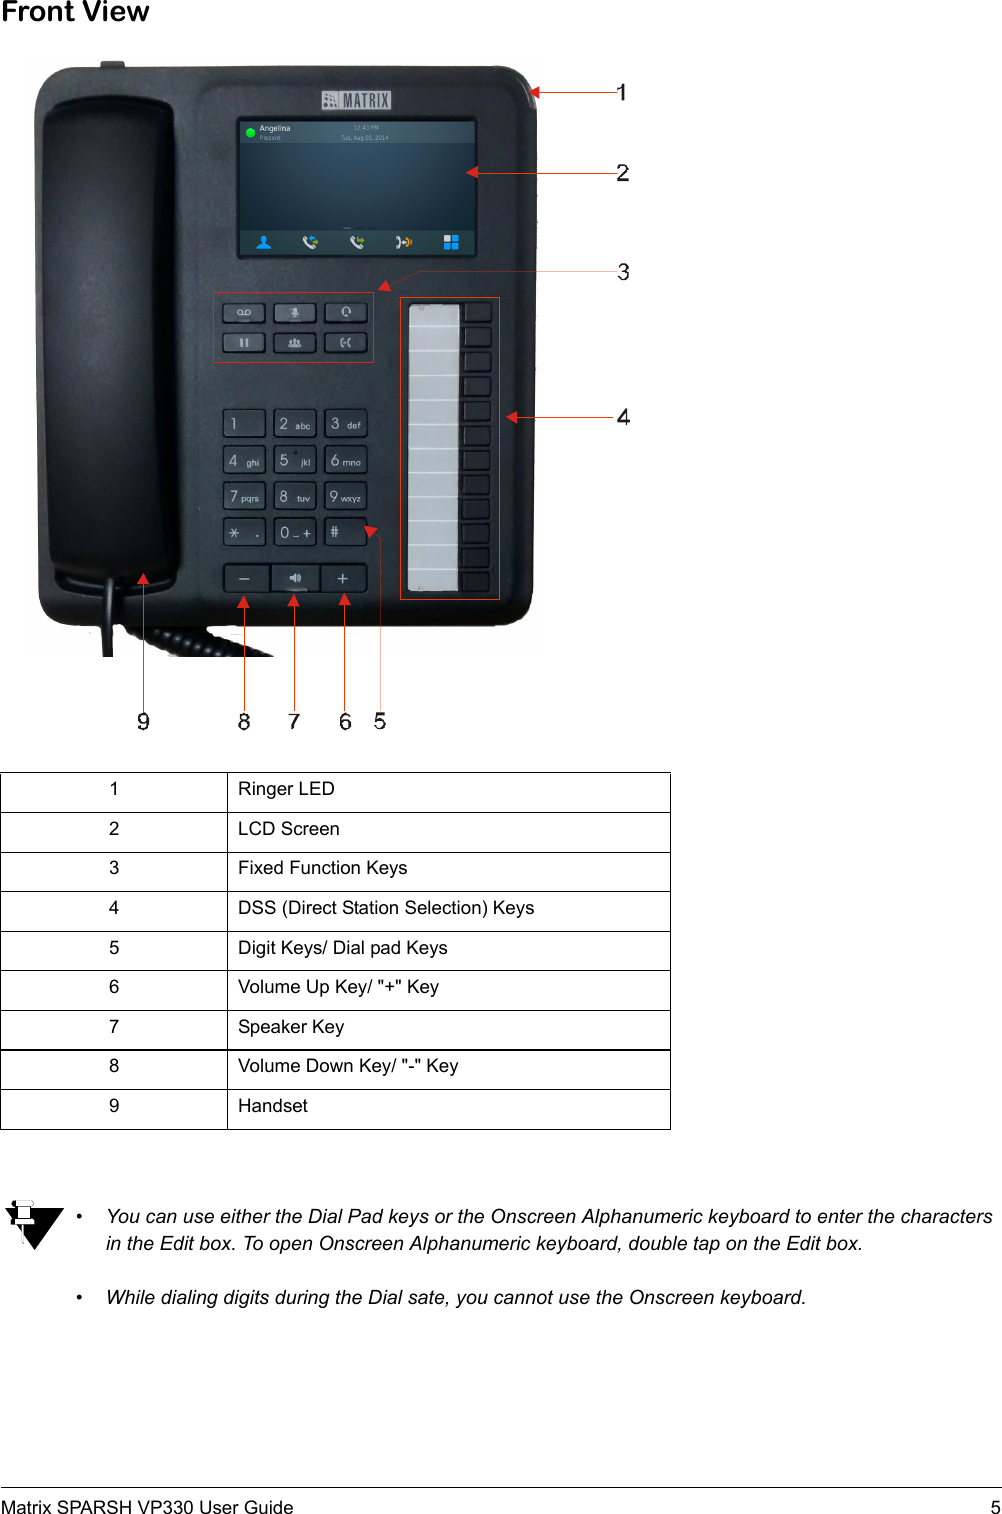 Matrix SPARSH VP330 User Guide 5Front View• You can use either the Dial Pad keys or the Onscreen Alphanumeric keyboard to enter the characters in the Edit box. To open Onscreen Alphanumeric keyboard, double tap on the Edit box.• While dialing digits during the Dial sate, you cannot use the Onscreen keyboard.1 Ringer LED2 LCD Screen3 Fixed Function Keys4 DSS (Direct Station Selection) Keys5 Digit Keys/ Dial pad Keys6 Volume Up Key/ &quot;+&quot; Key7 Speaker Key8 Volume Down Key/ &quot;-&quot; Key9 Handset